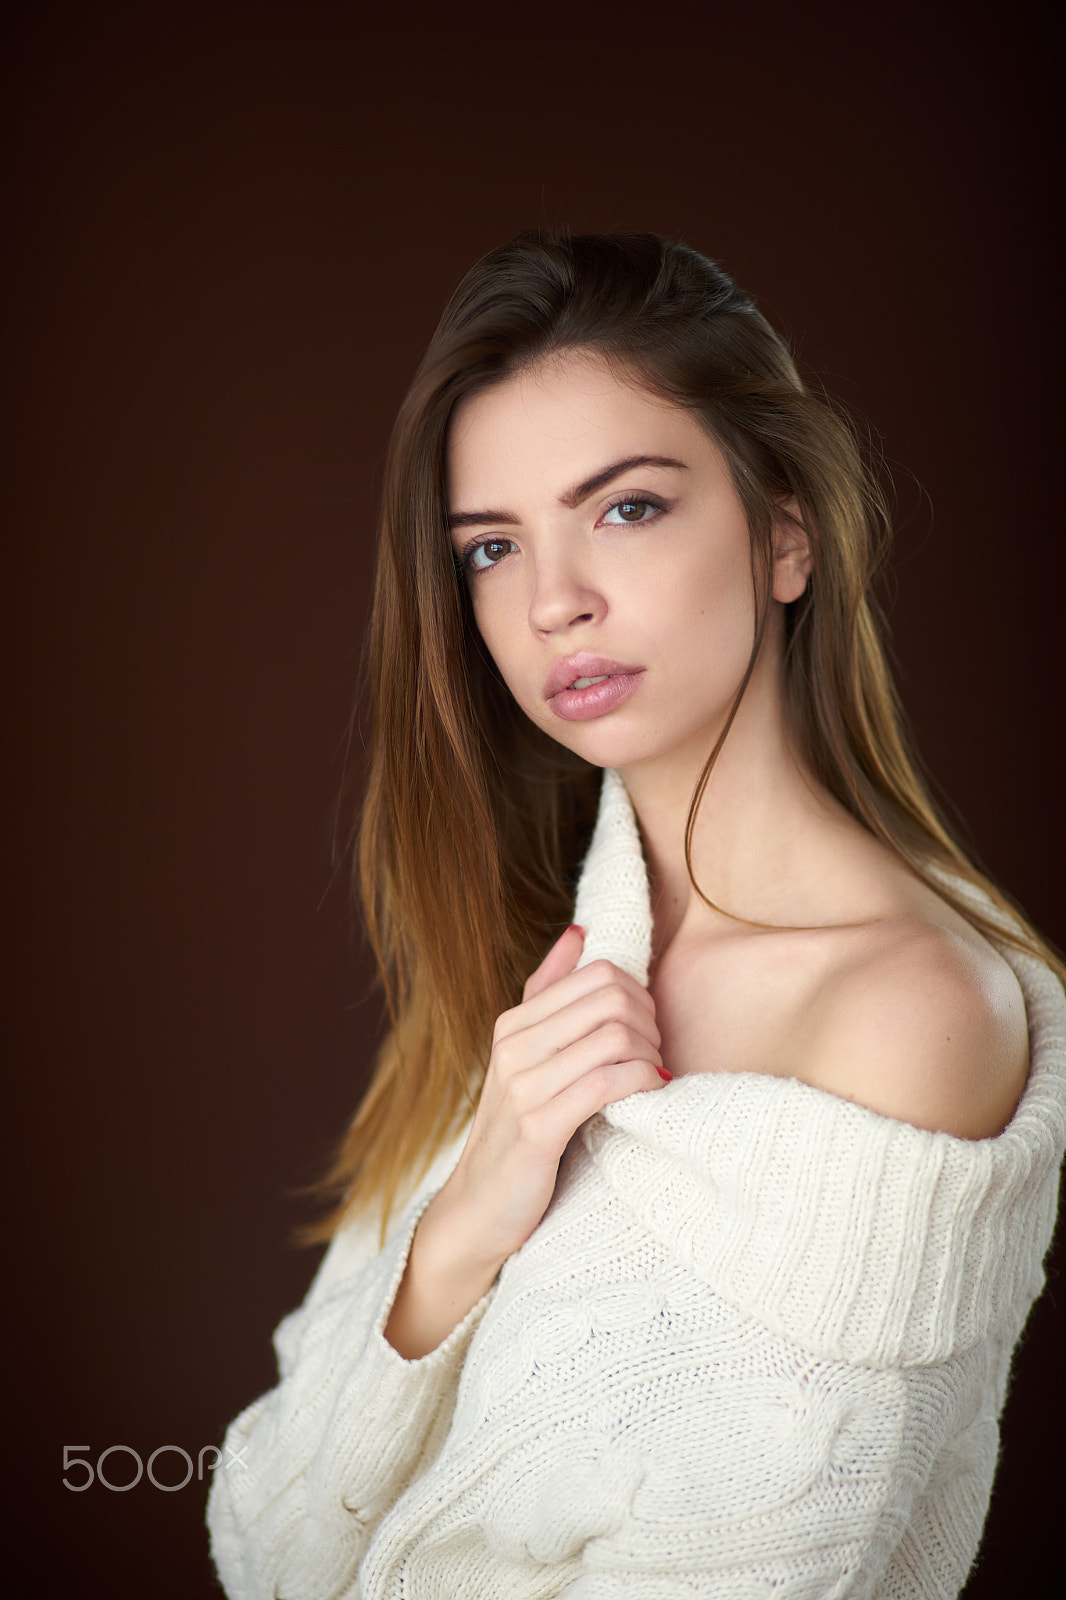 Sony a7 II + Sony DT 50mm F1.8 SAM sample photo. Model posing in studio during classic test shoot photography